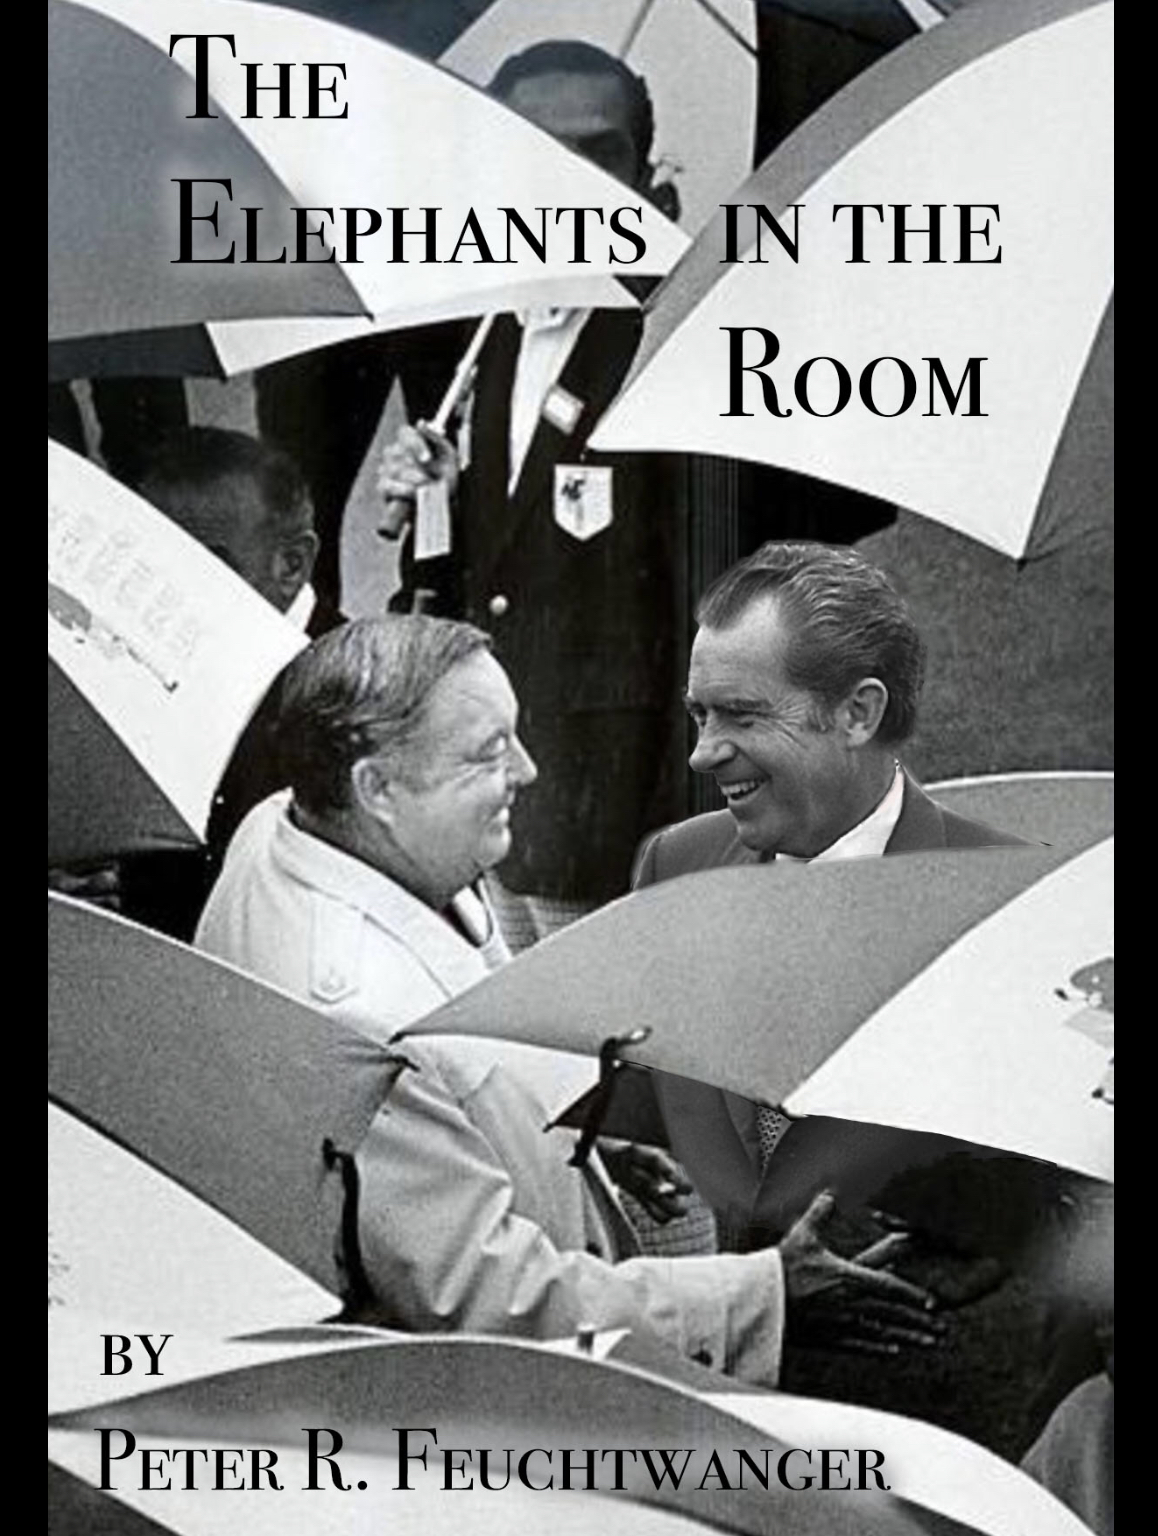 THE ELEPHANTS IN THE ROOM